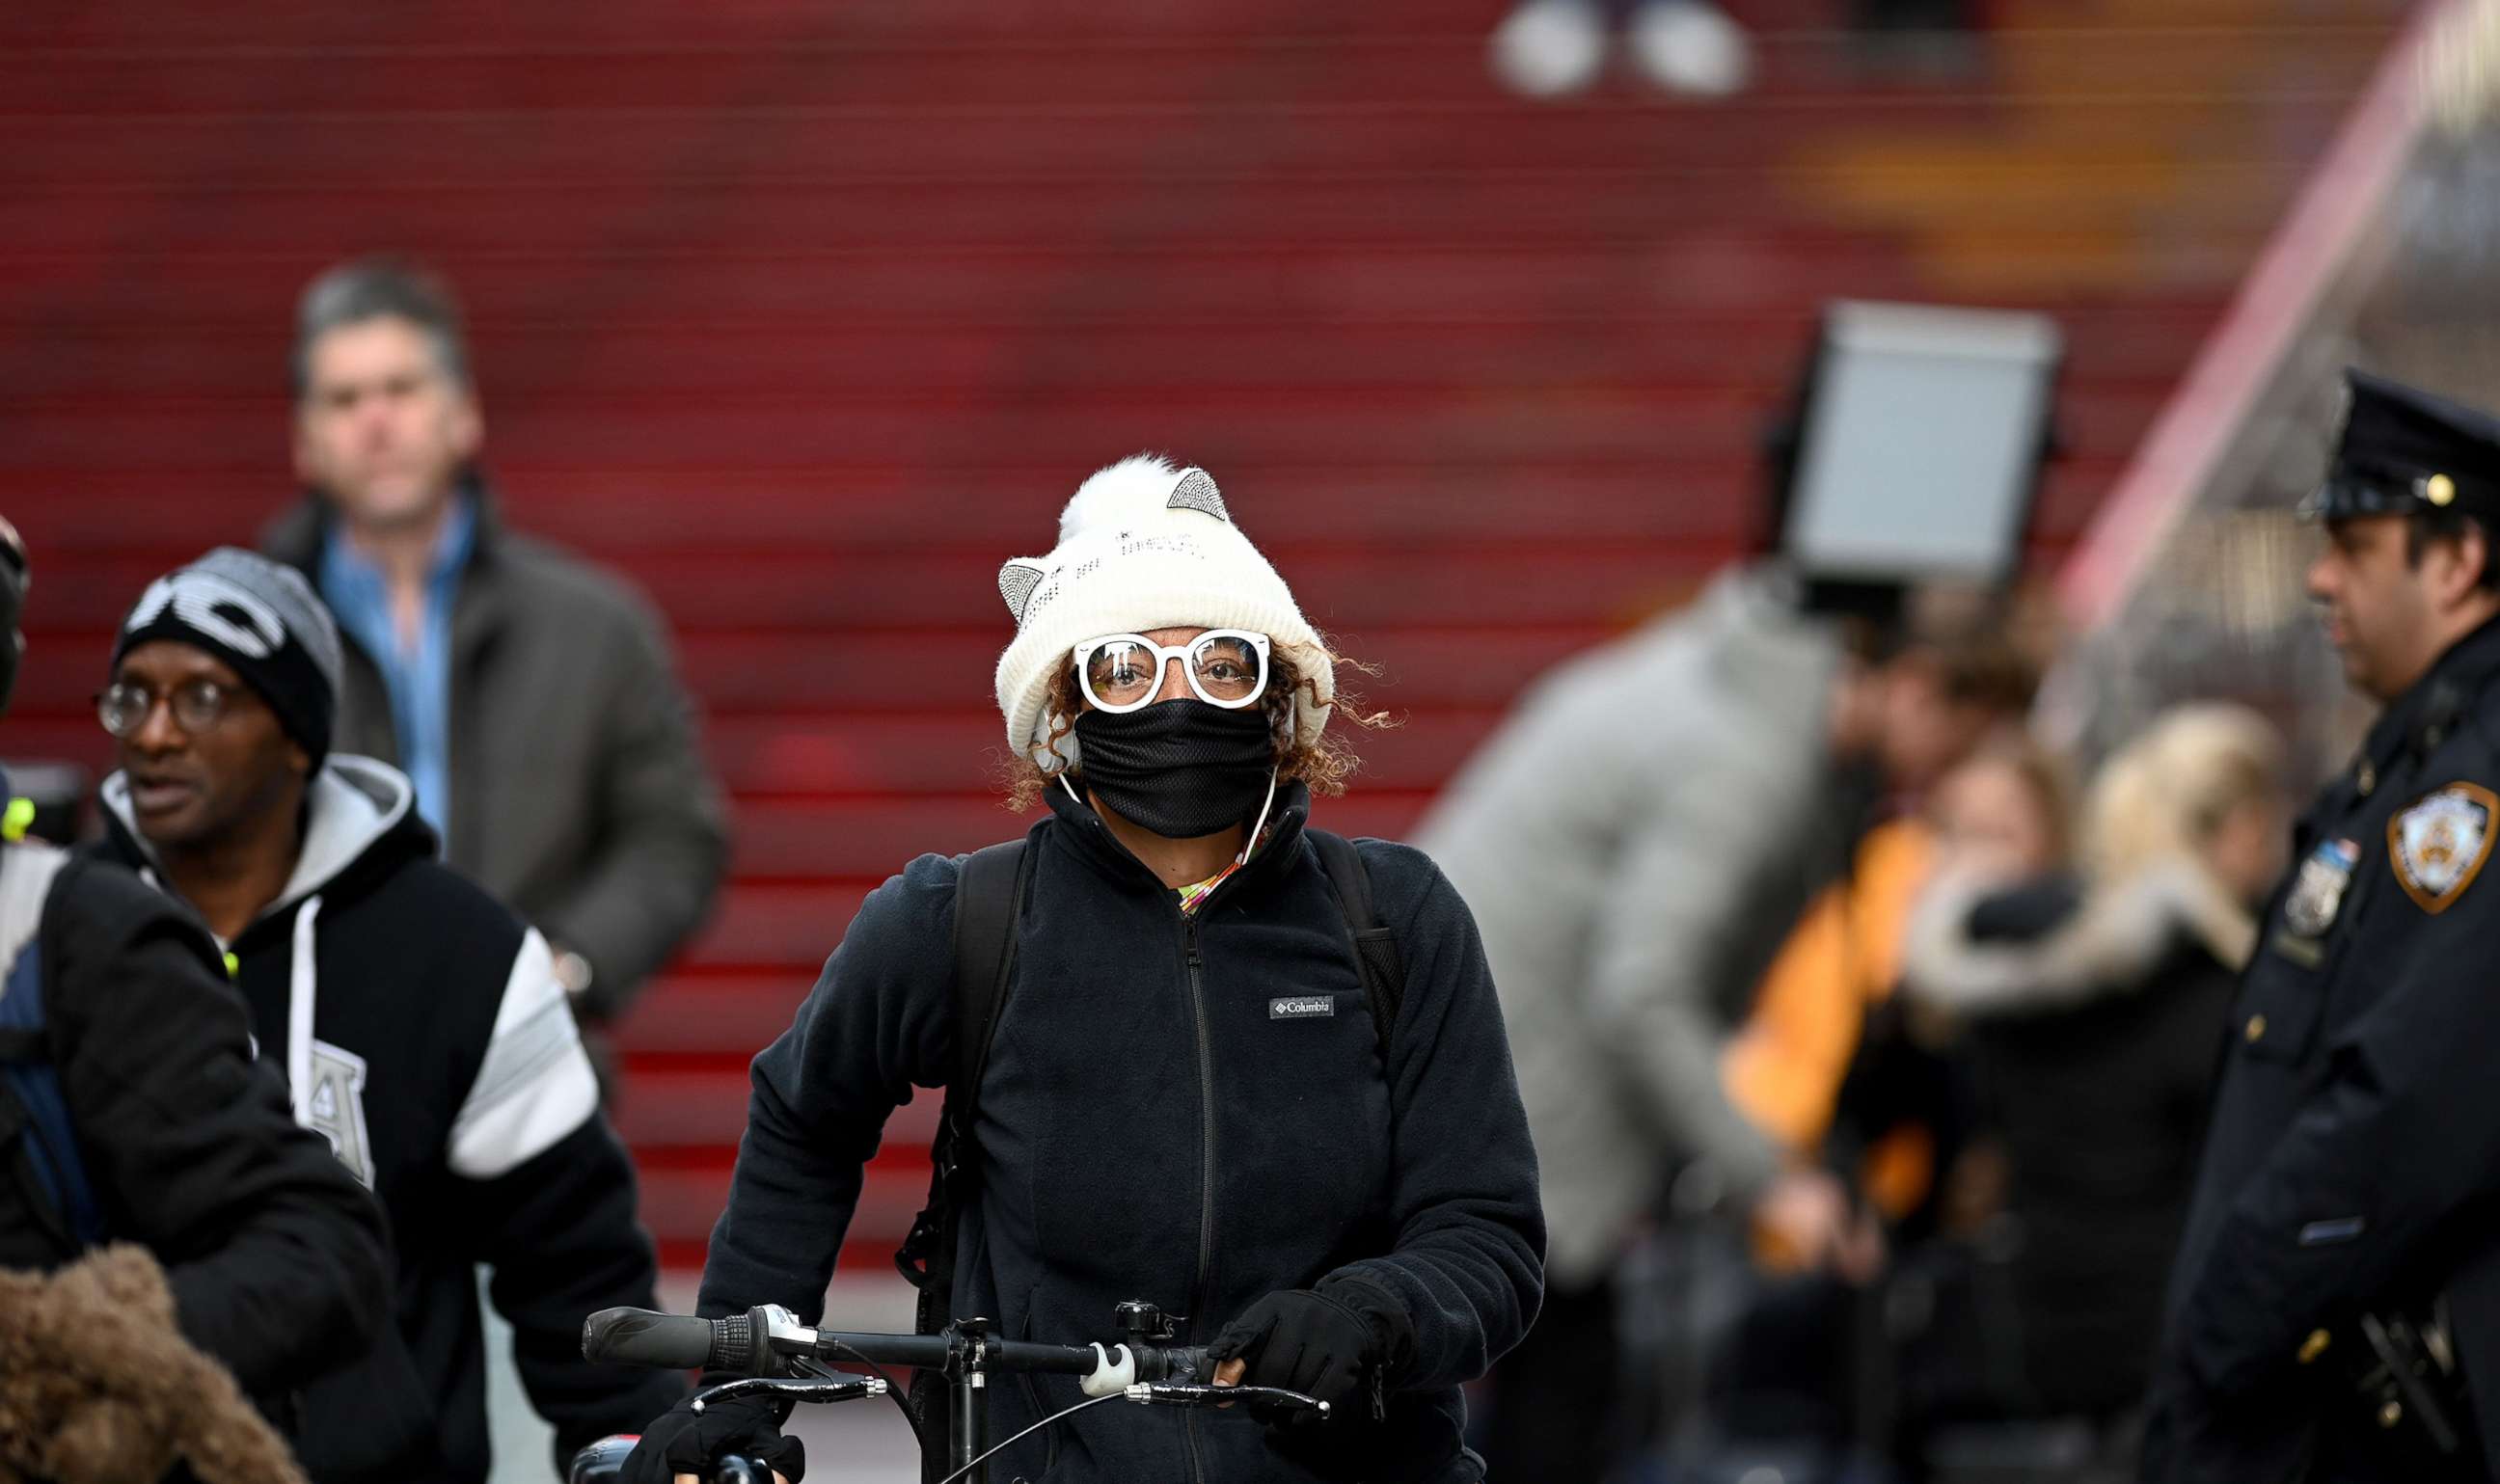 PHOTO: A woman wearing a mask pushes her bike in Times Square, on March 18, 2020 in New York City.